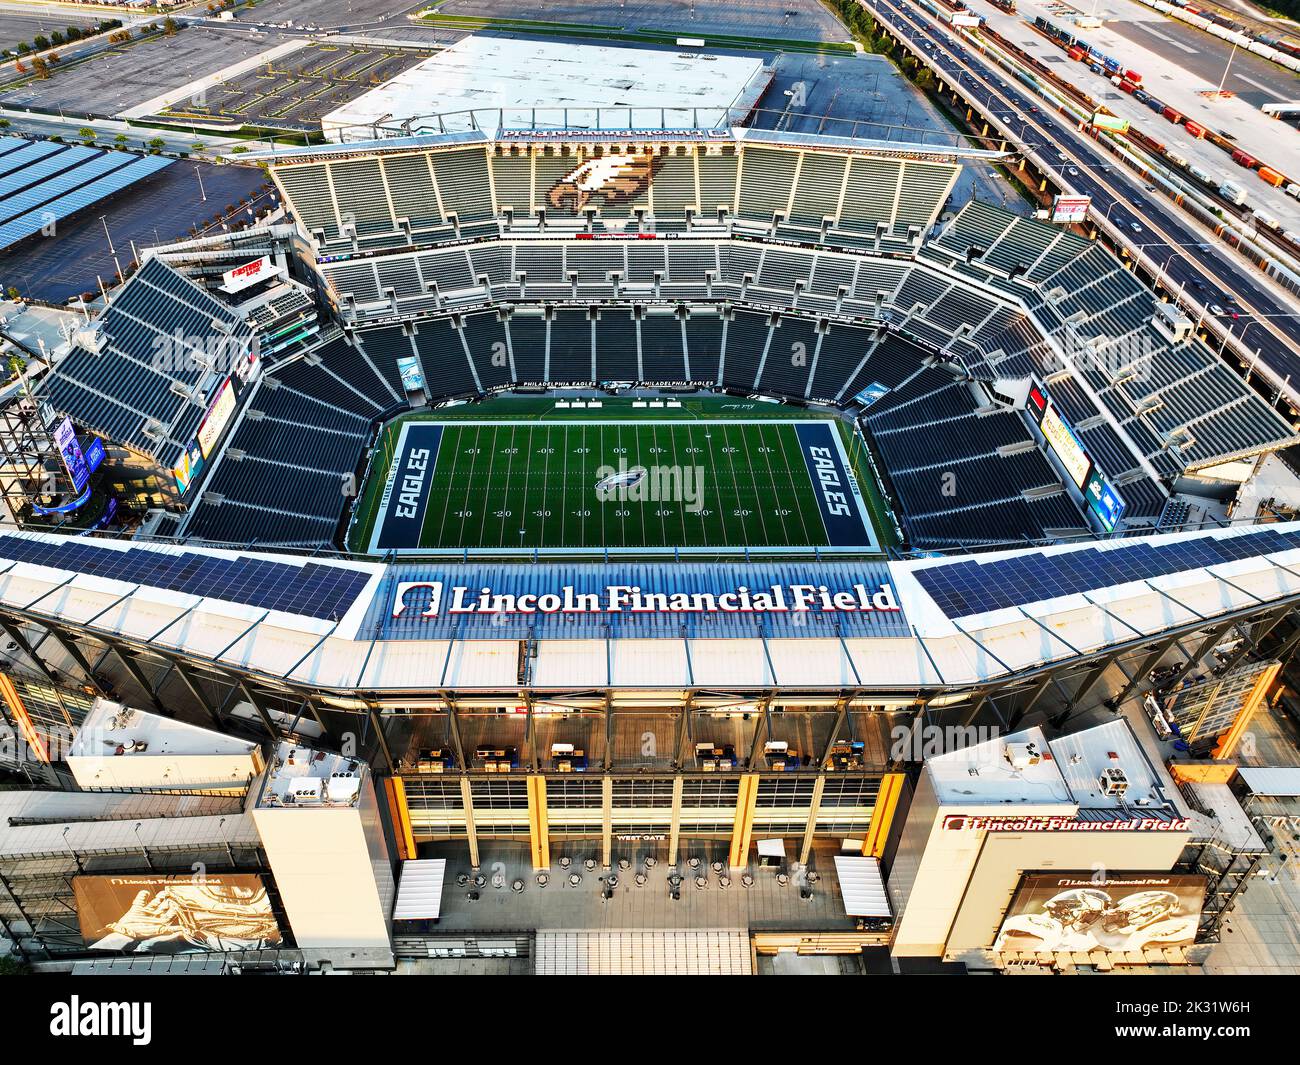 Aerial View of Empty Lincoln Financial Field in Philadelphia Stock Photo